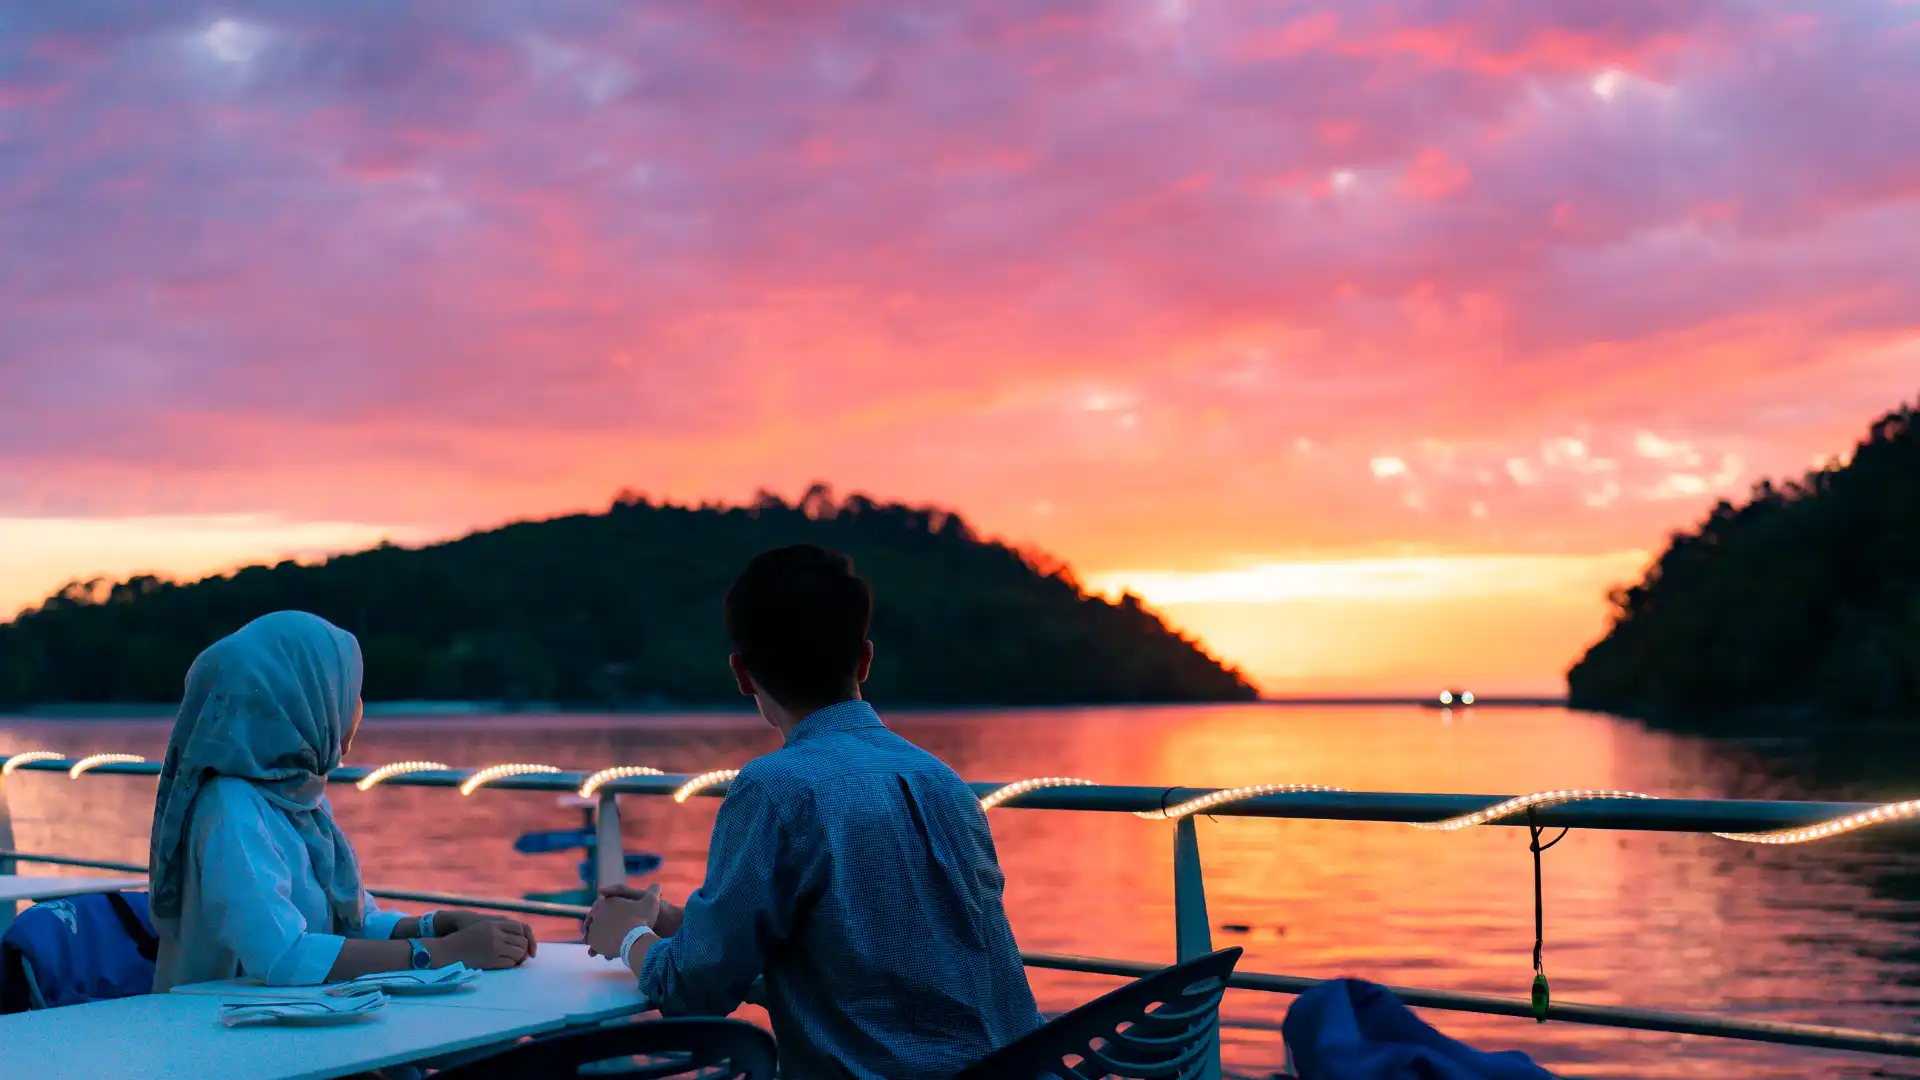 A couple enjoys a sunset dinner on a boat overlooking a scenic lake.